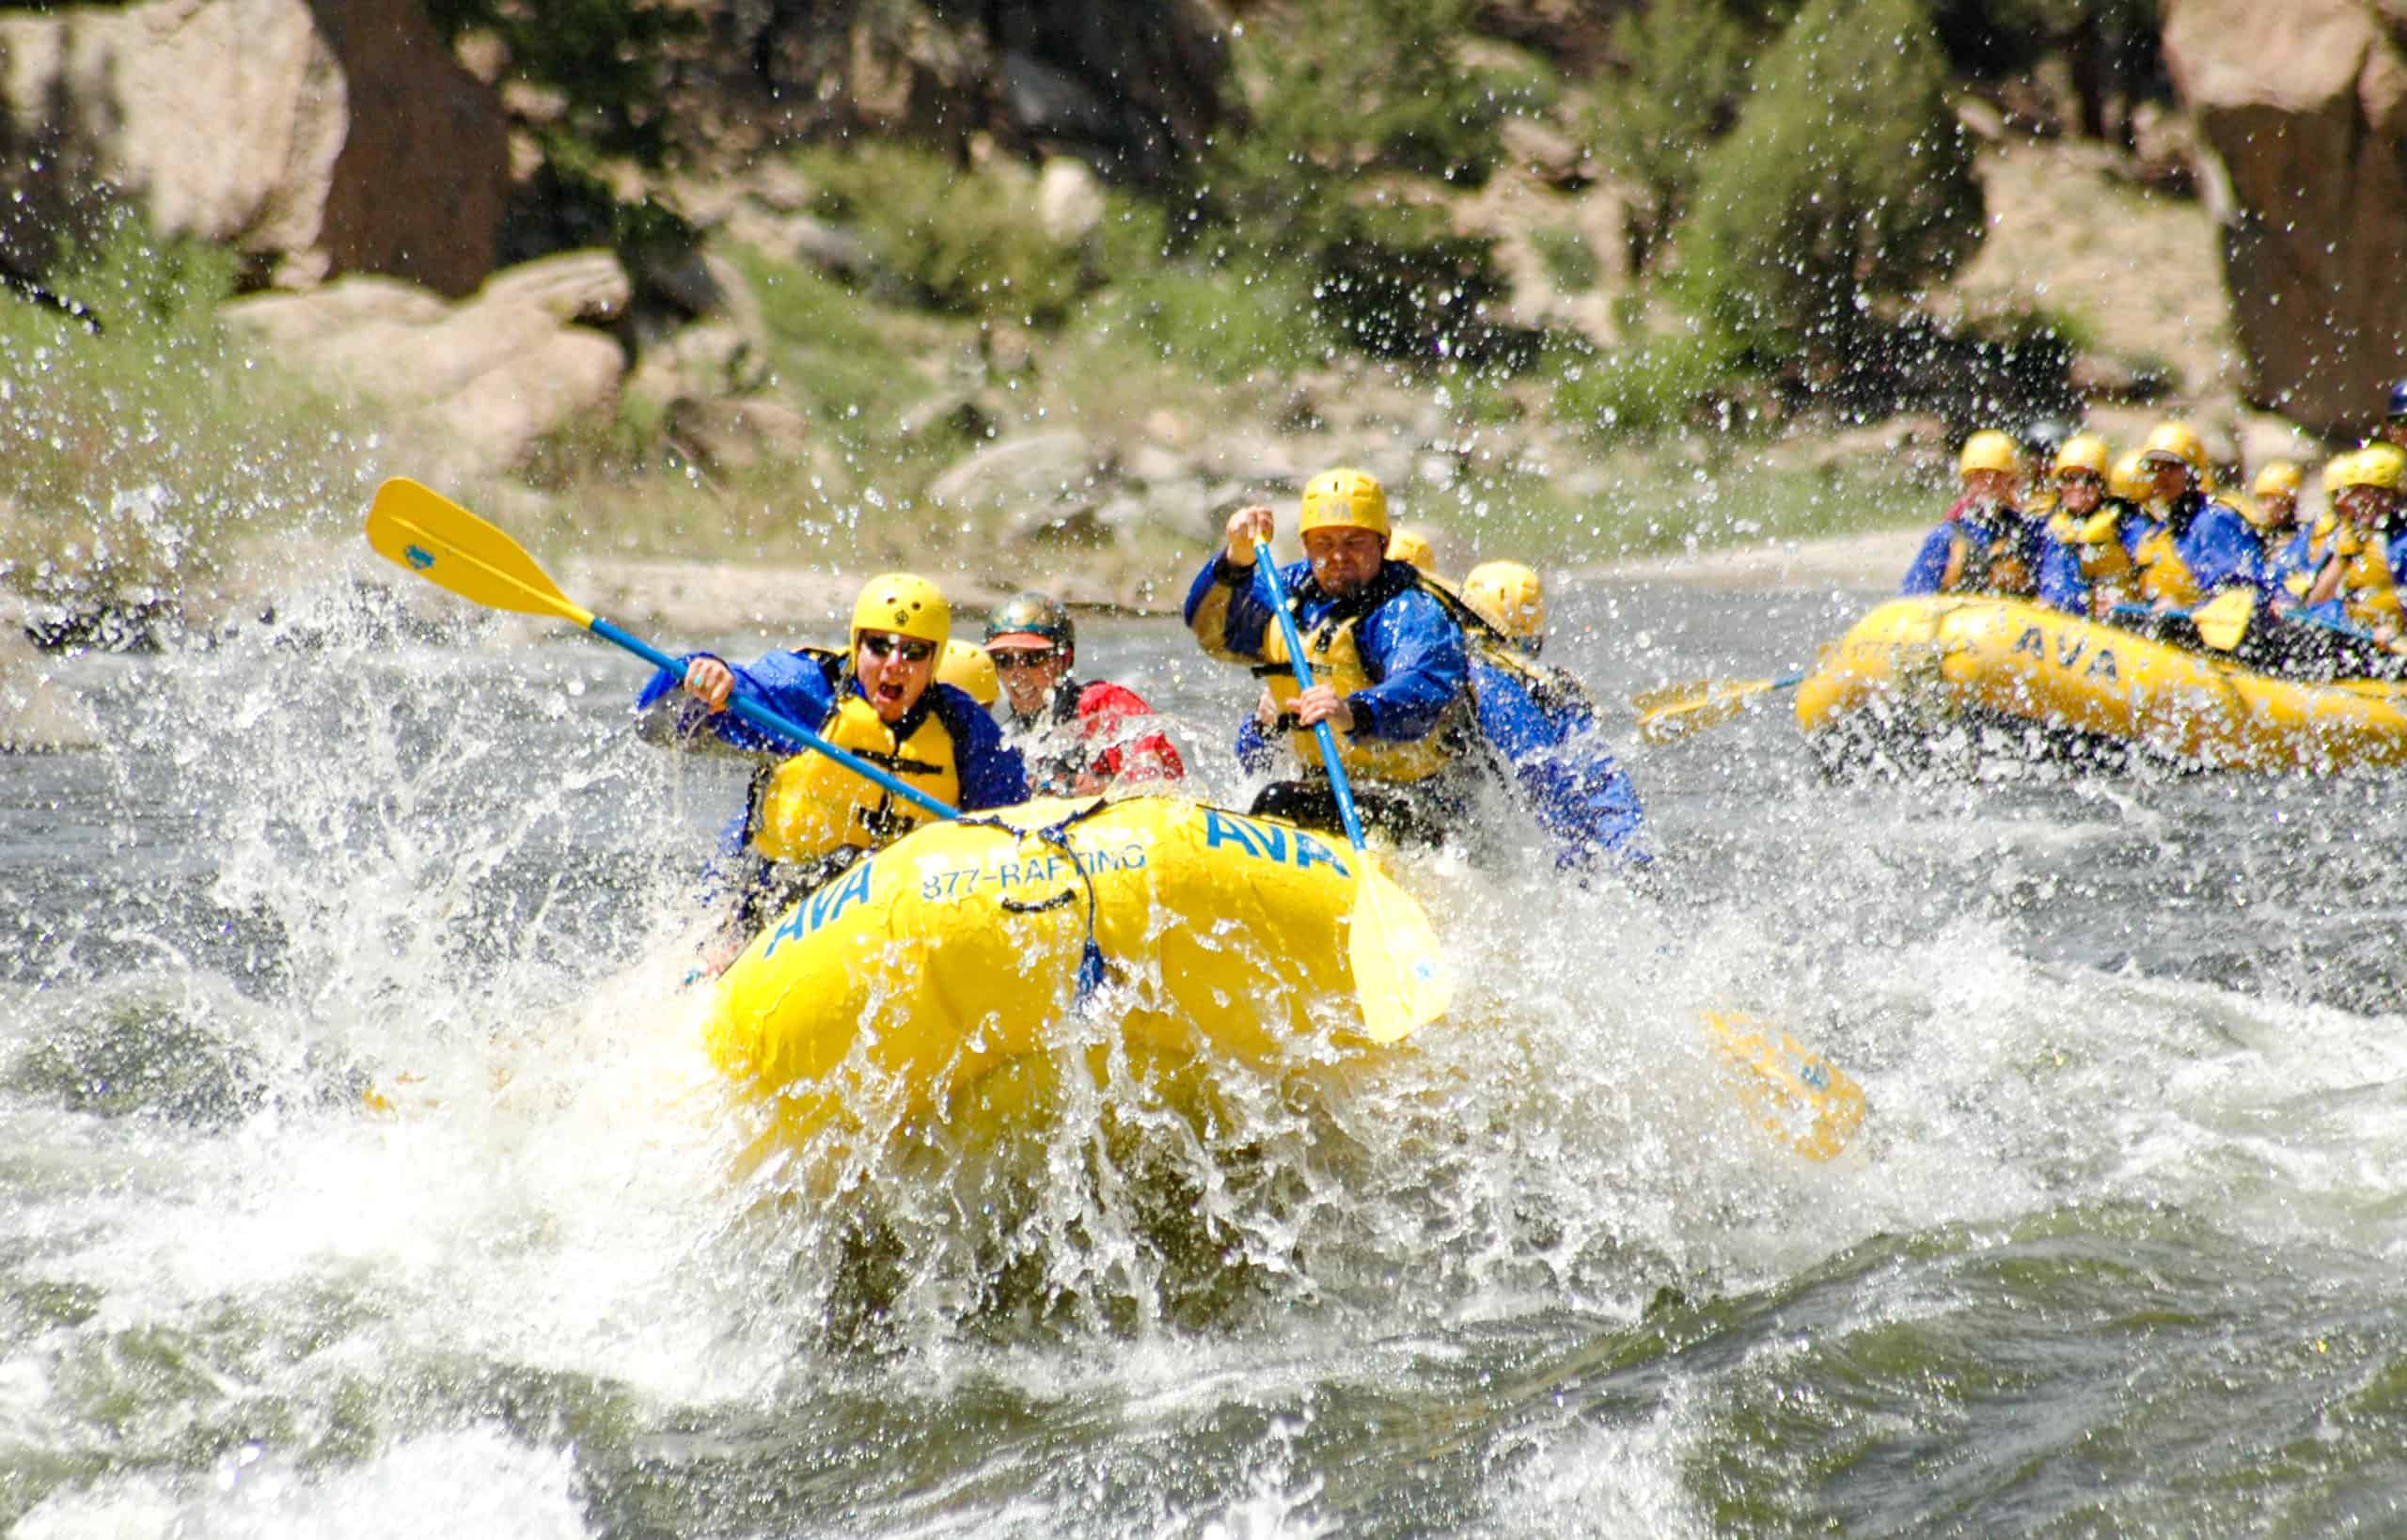 A group of rafters splash into whitewater while another raft follows closely behind